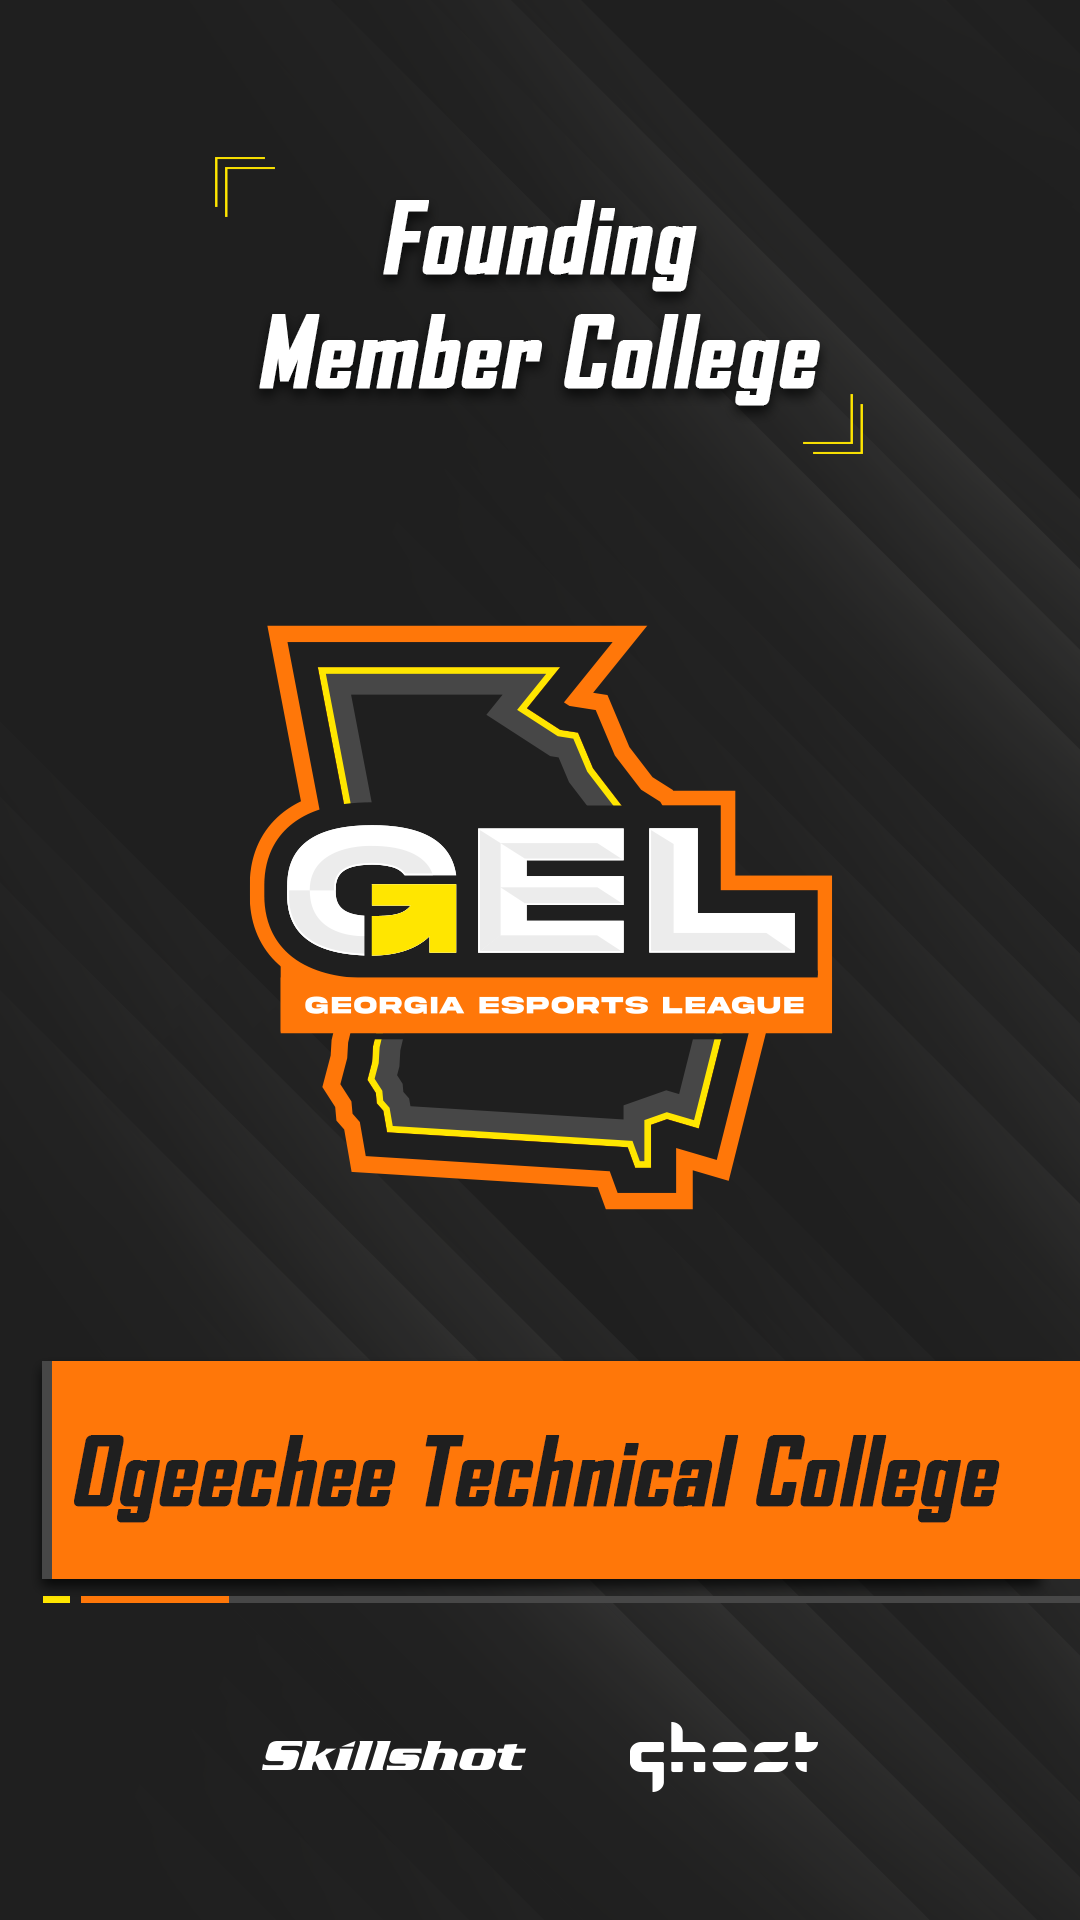 Ogeechee Technical College's Out to Conquer Partners with Georgia Esports League